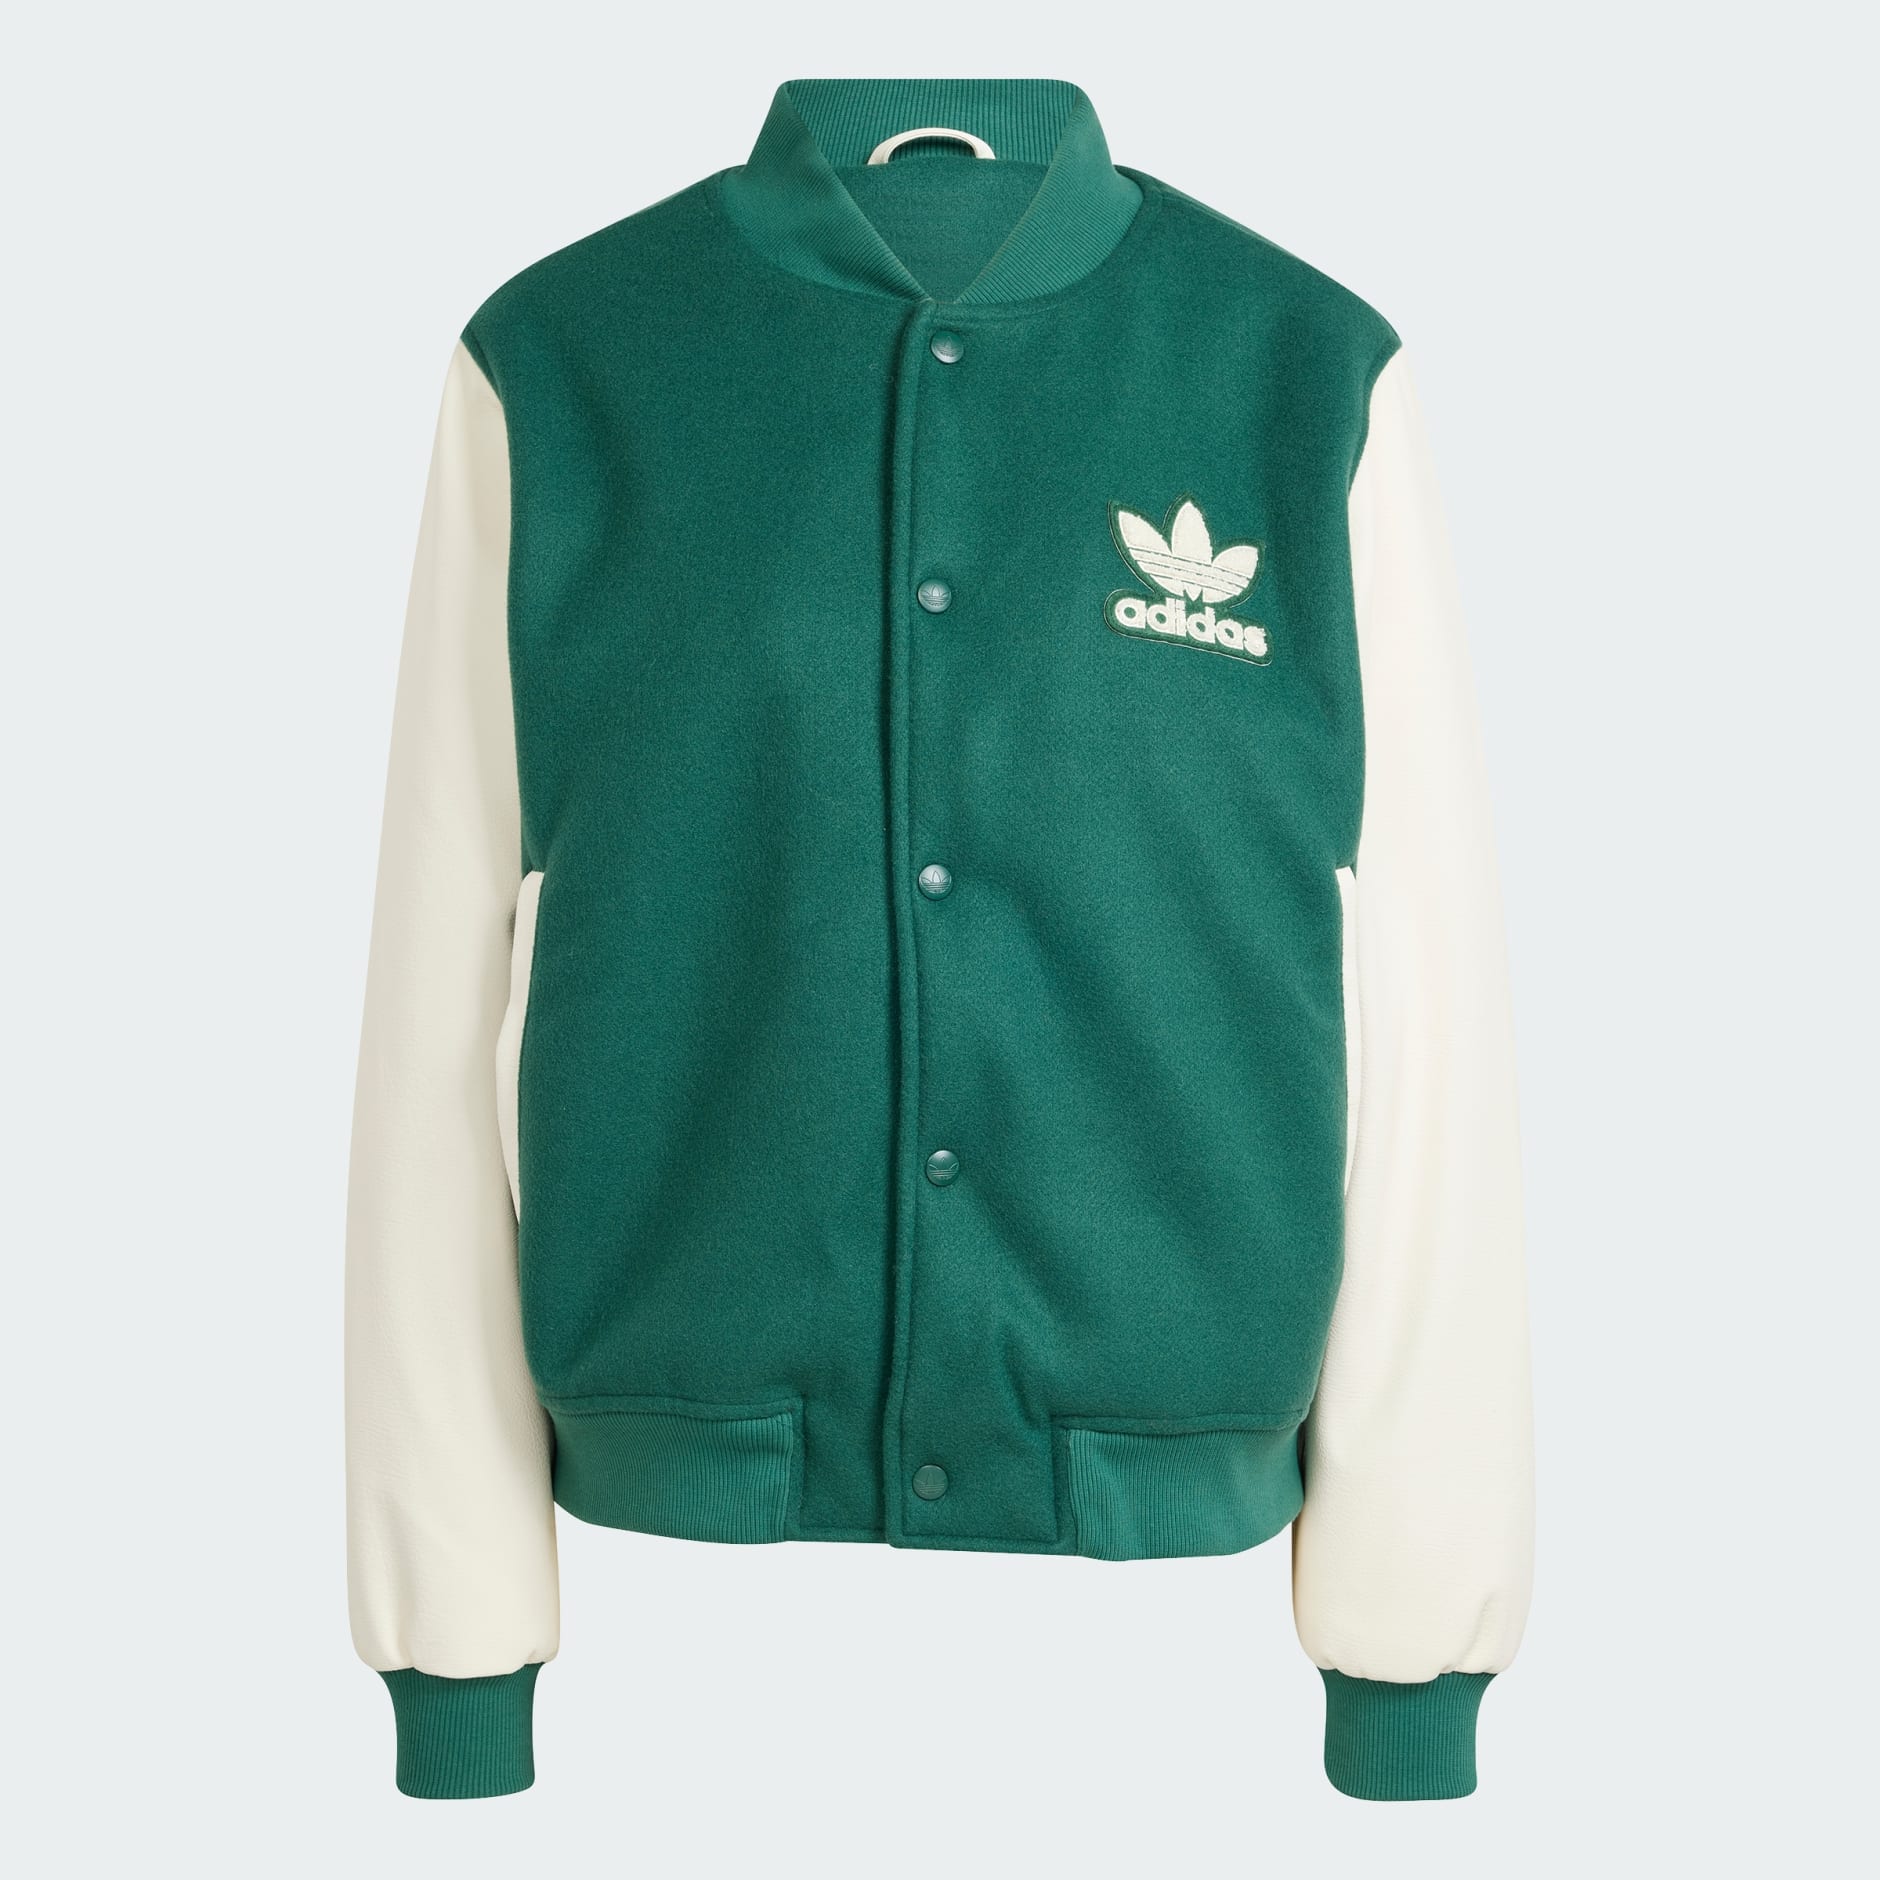 Clothing - VRCT Graphic Jacket - Green | adidas South Africa